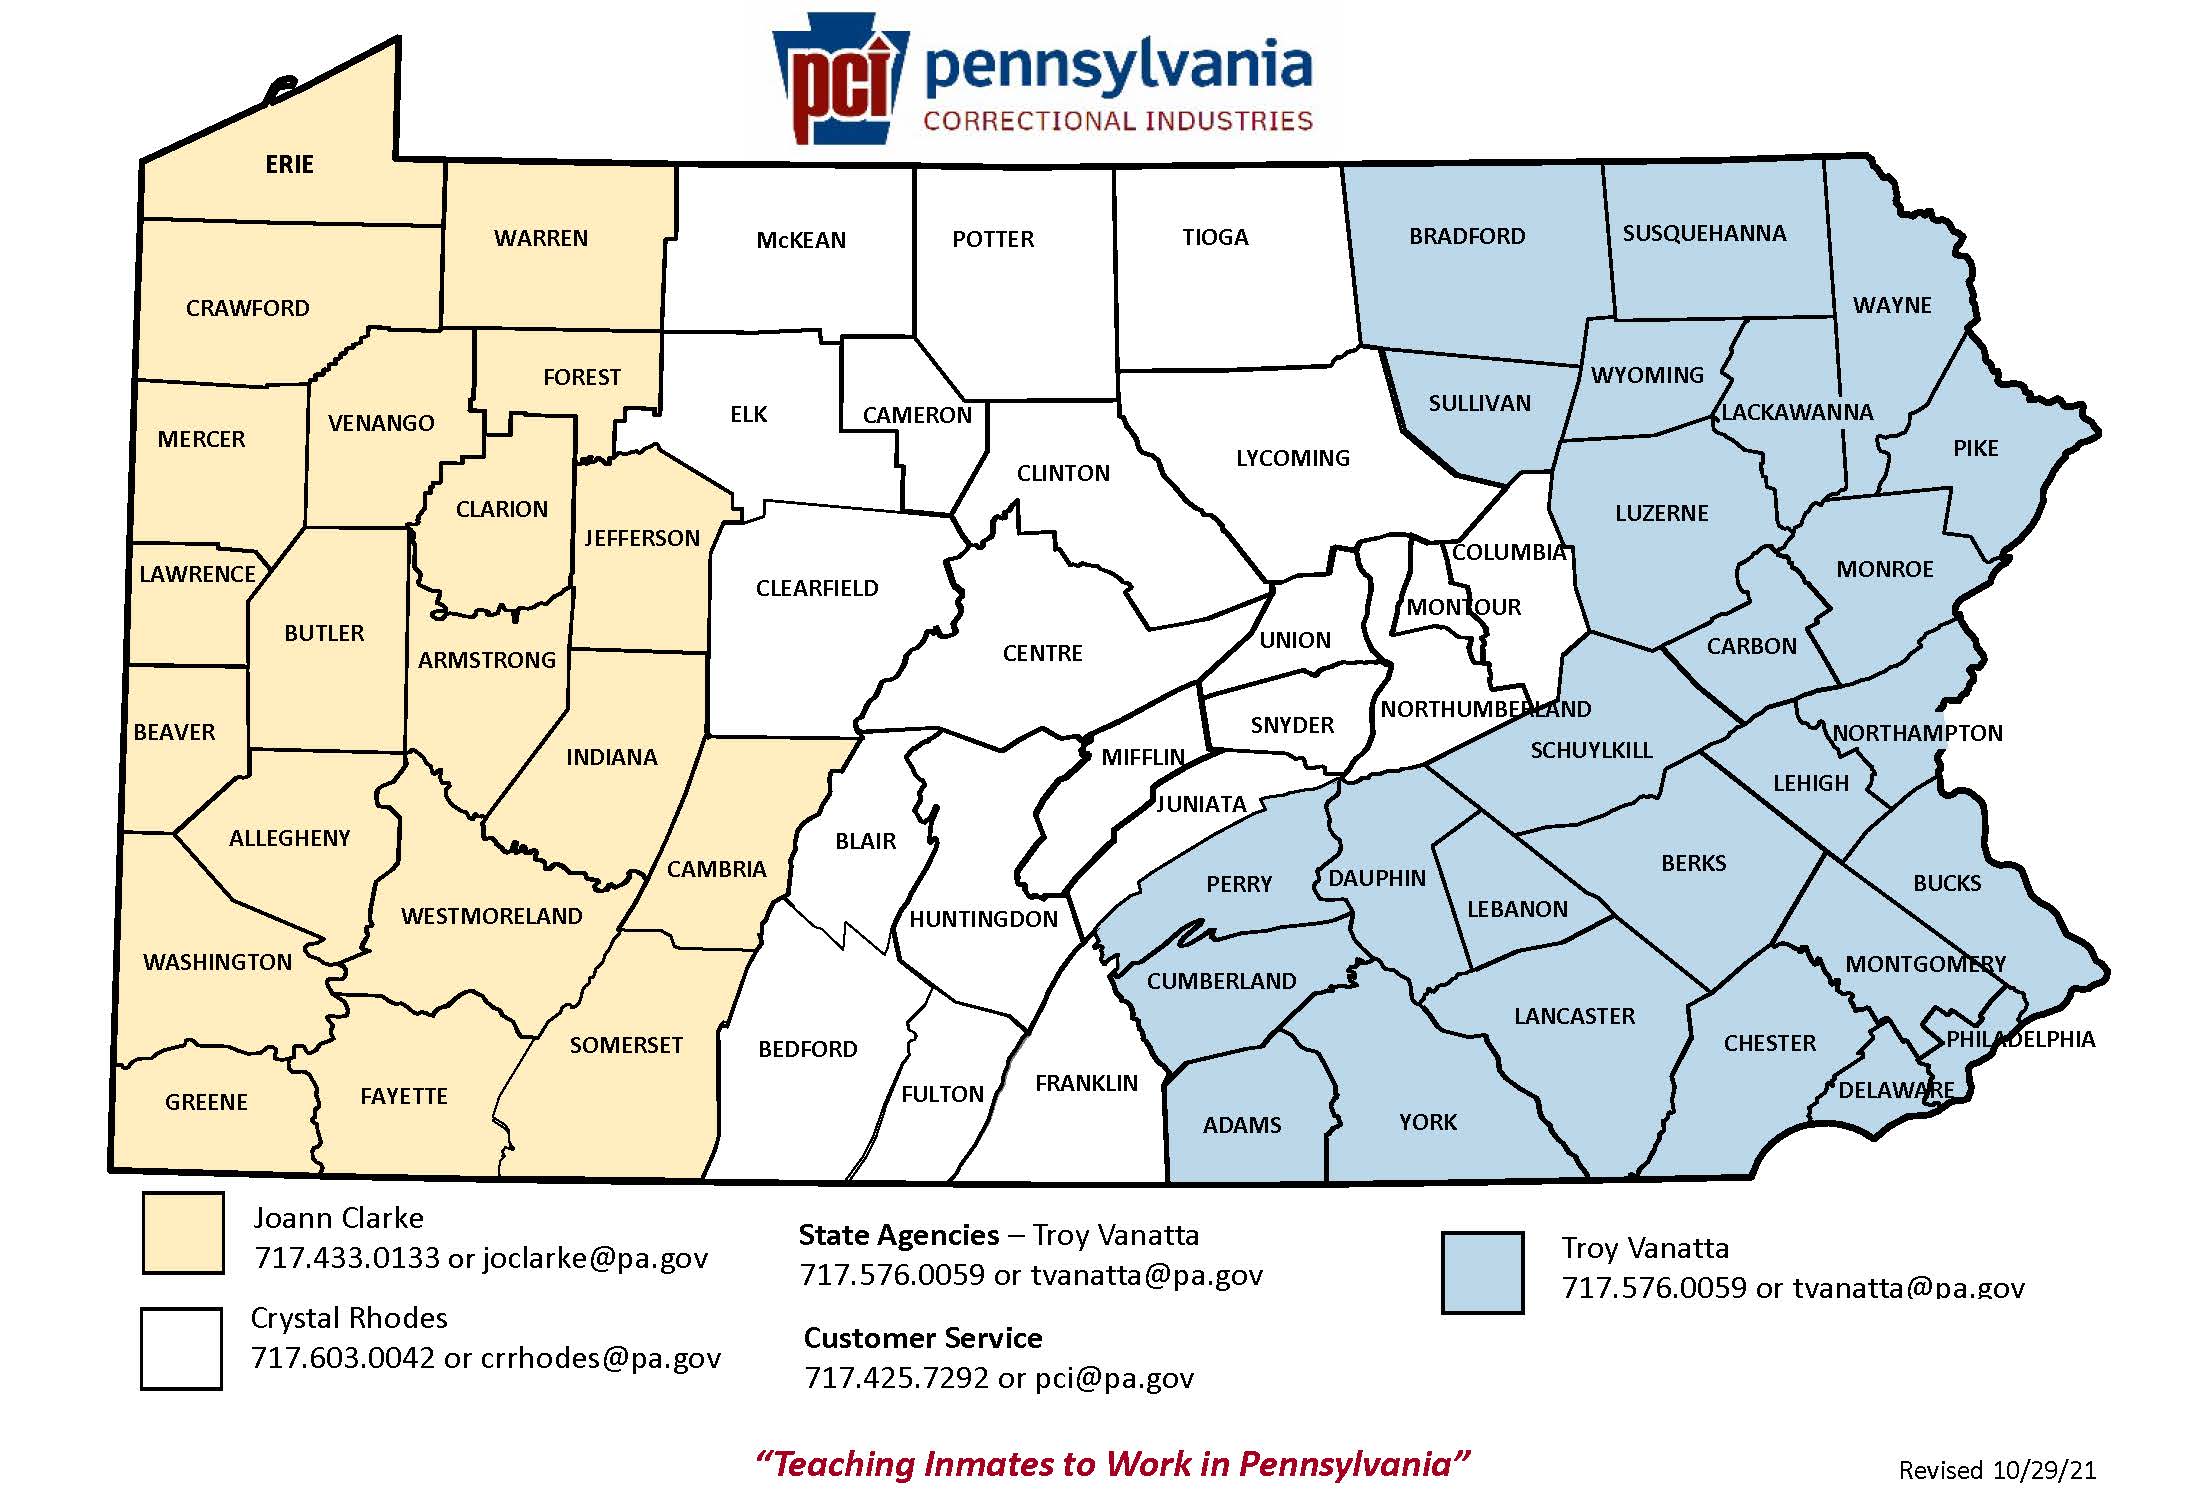 A map of Pennsylvania divided into regions based on PCI sales and marketing representatives